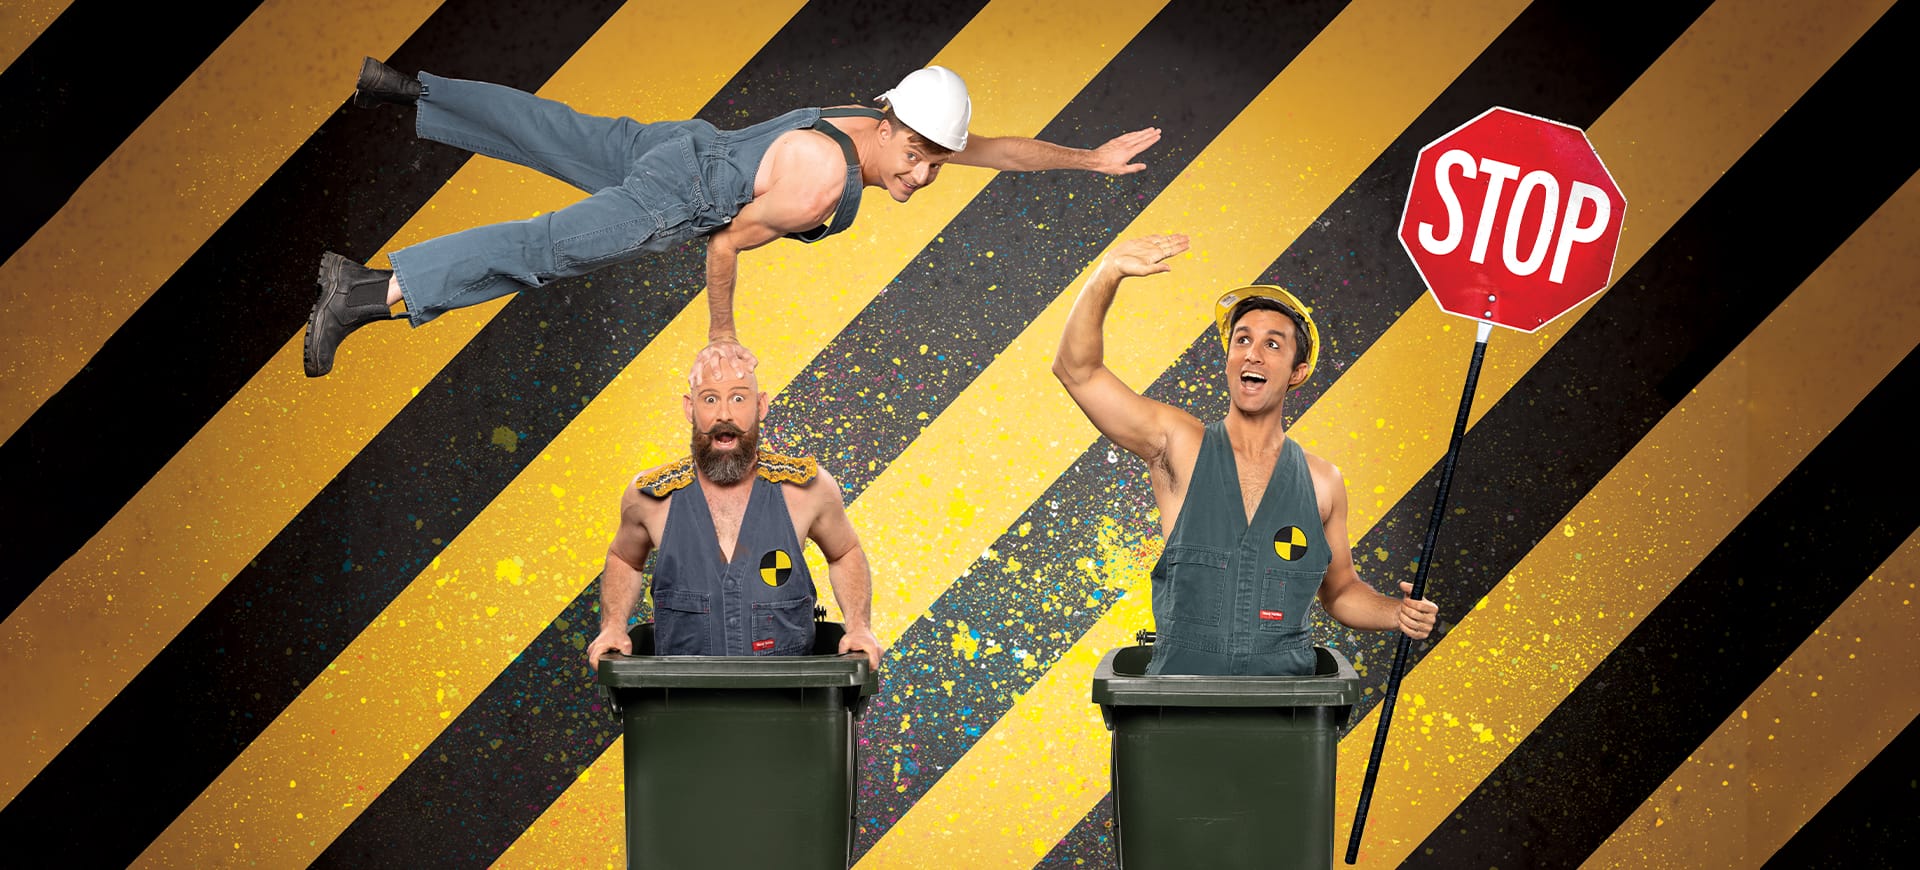 Two men in overalls stand in wheelie bins whilst another balances on their head.